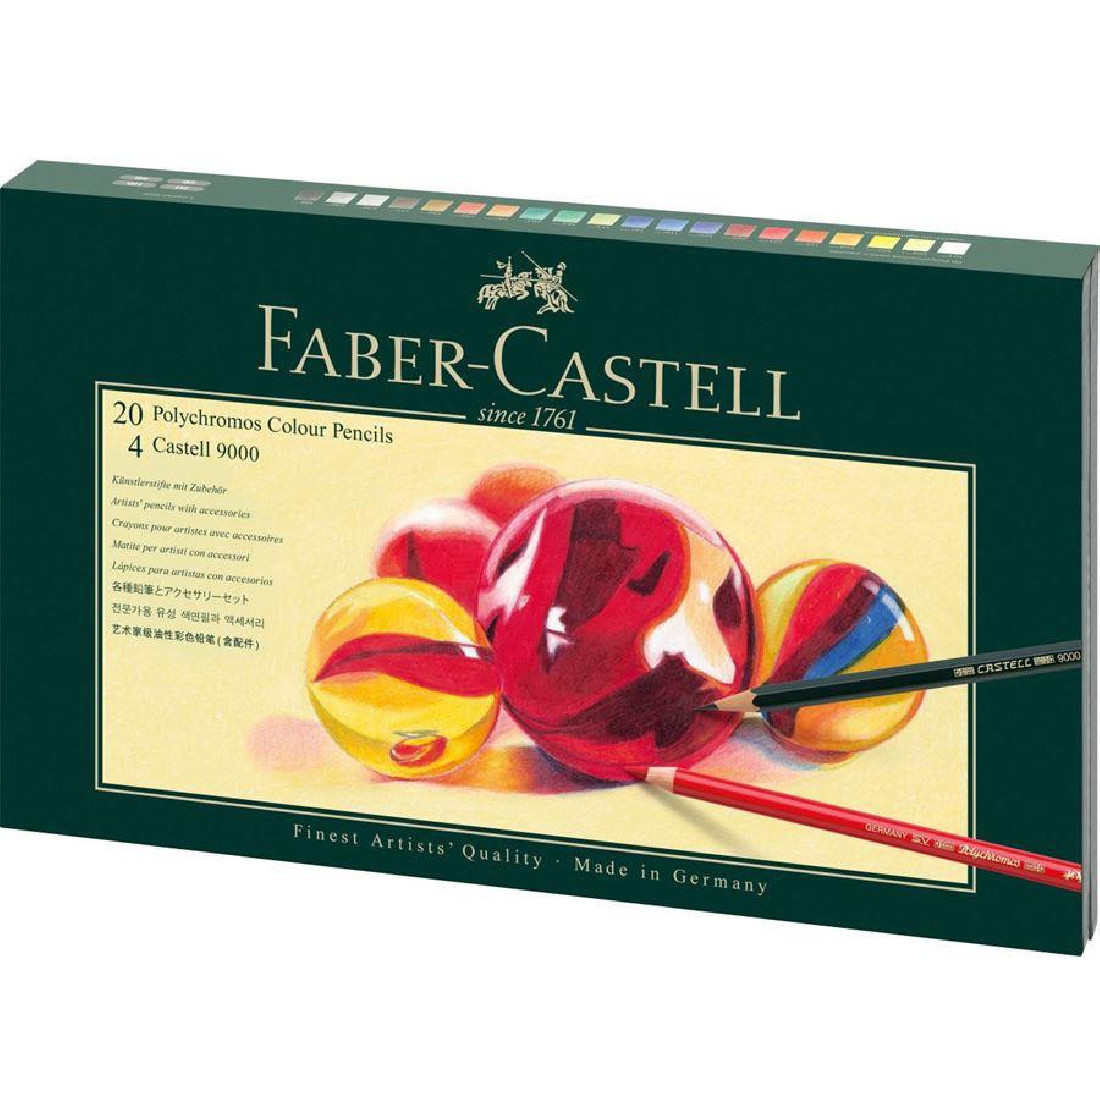 Faber Castell Mixed Media gift set Polychromos + Castell 9000